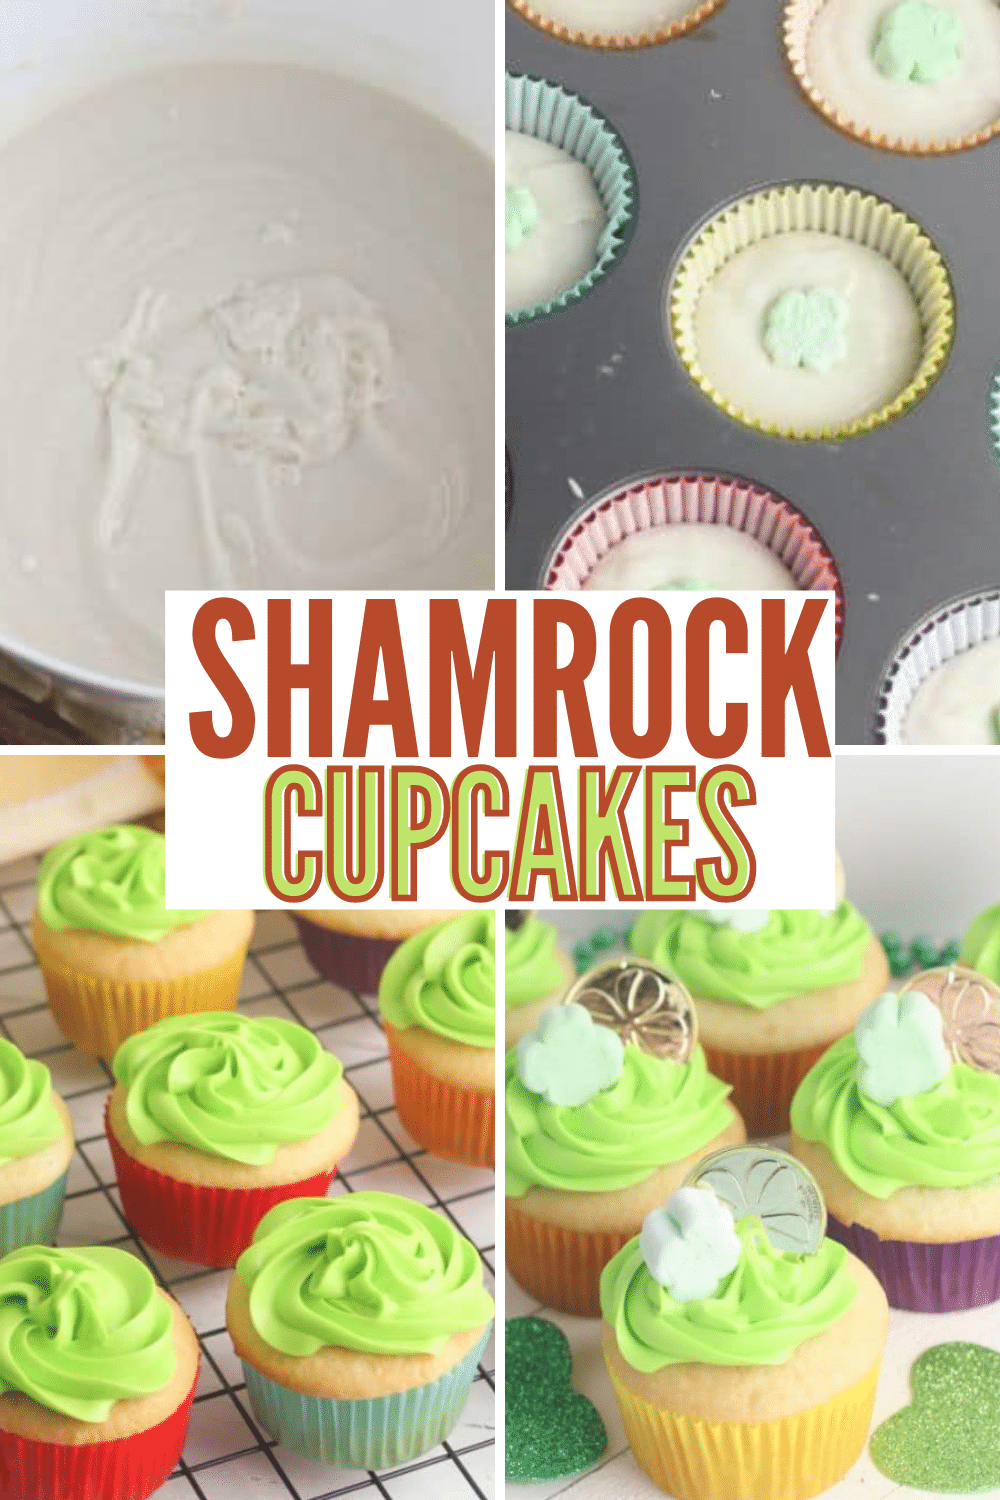 These Easy Shamrock Cupcakes are sure to satisfy the most mischievous of leprechauns. Anyone who gets to enjoy one will certainly feel lucky! #stpatricksday #shamrock #cupcakes via @wondermomwannab